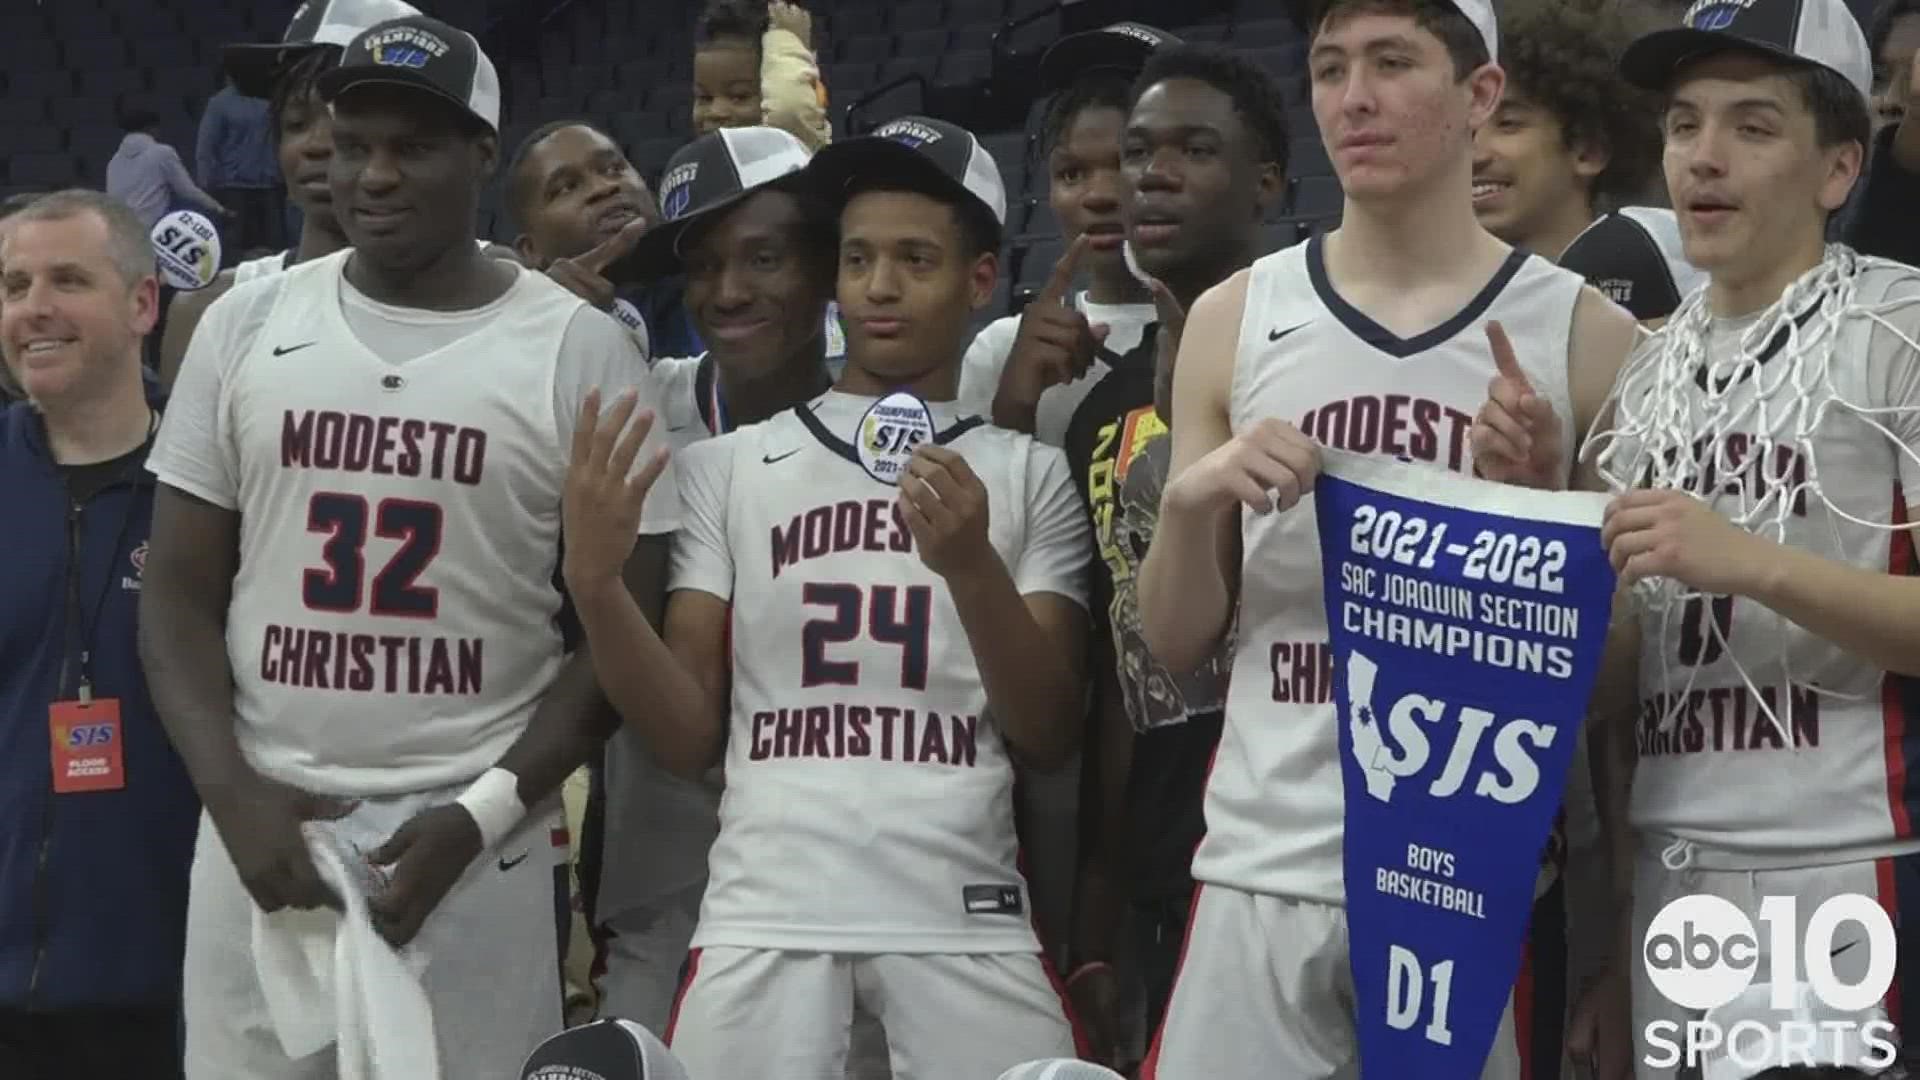 Jamari Phillips finished with 22 points to lead the Modesto Christian Crusaders to a 52-42 victory over Sacramento's Sheldon Huskies for the Div. I Section title.